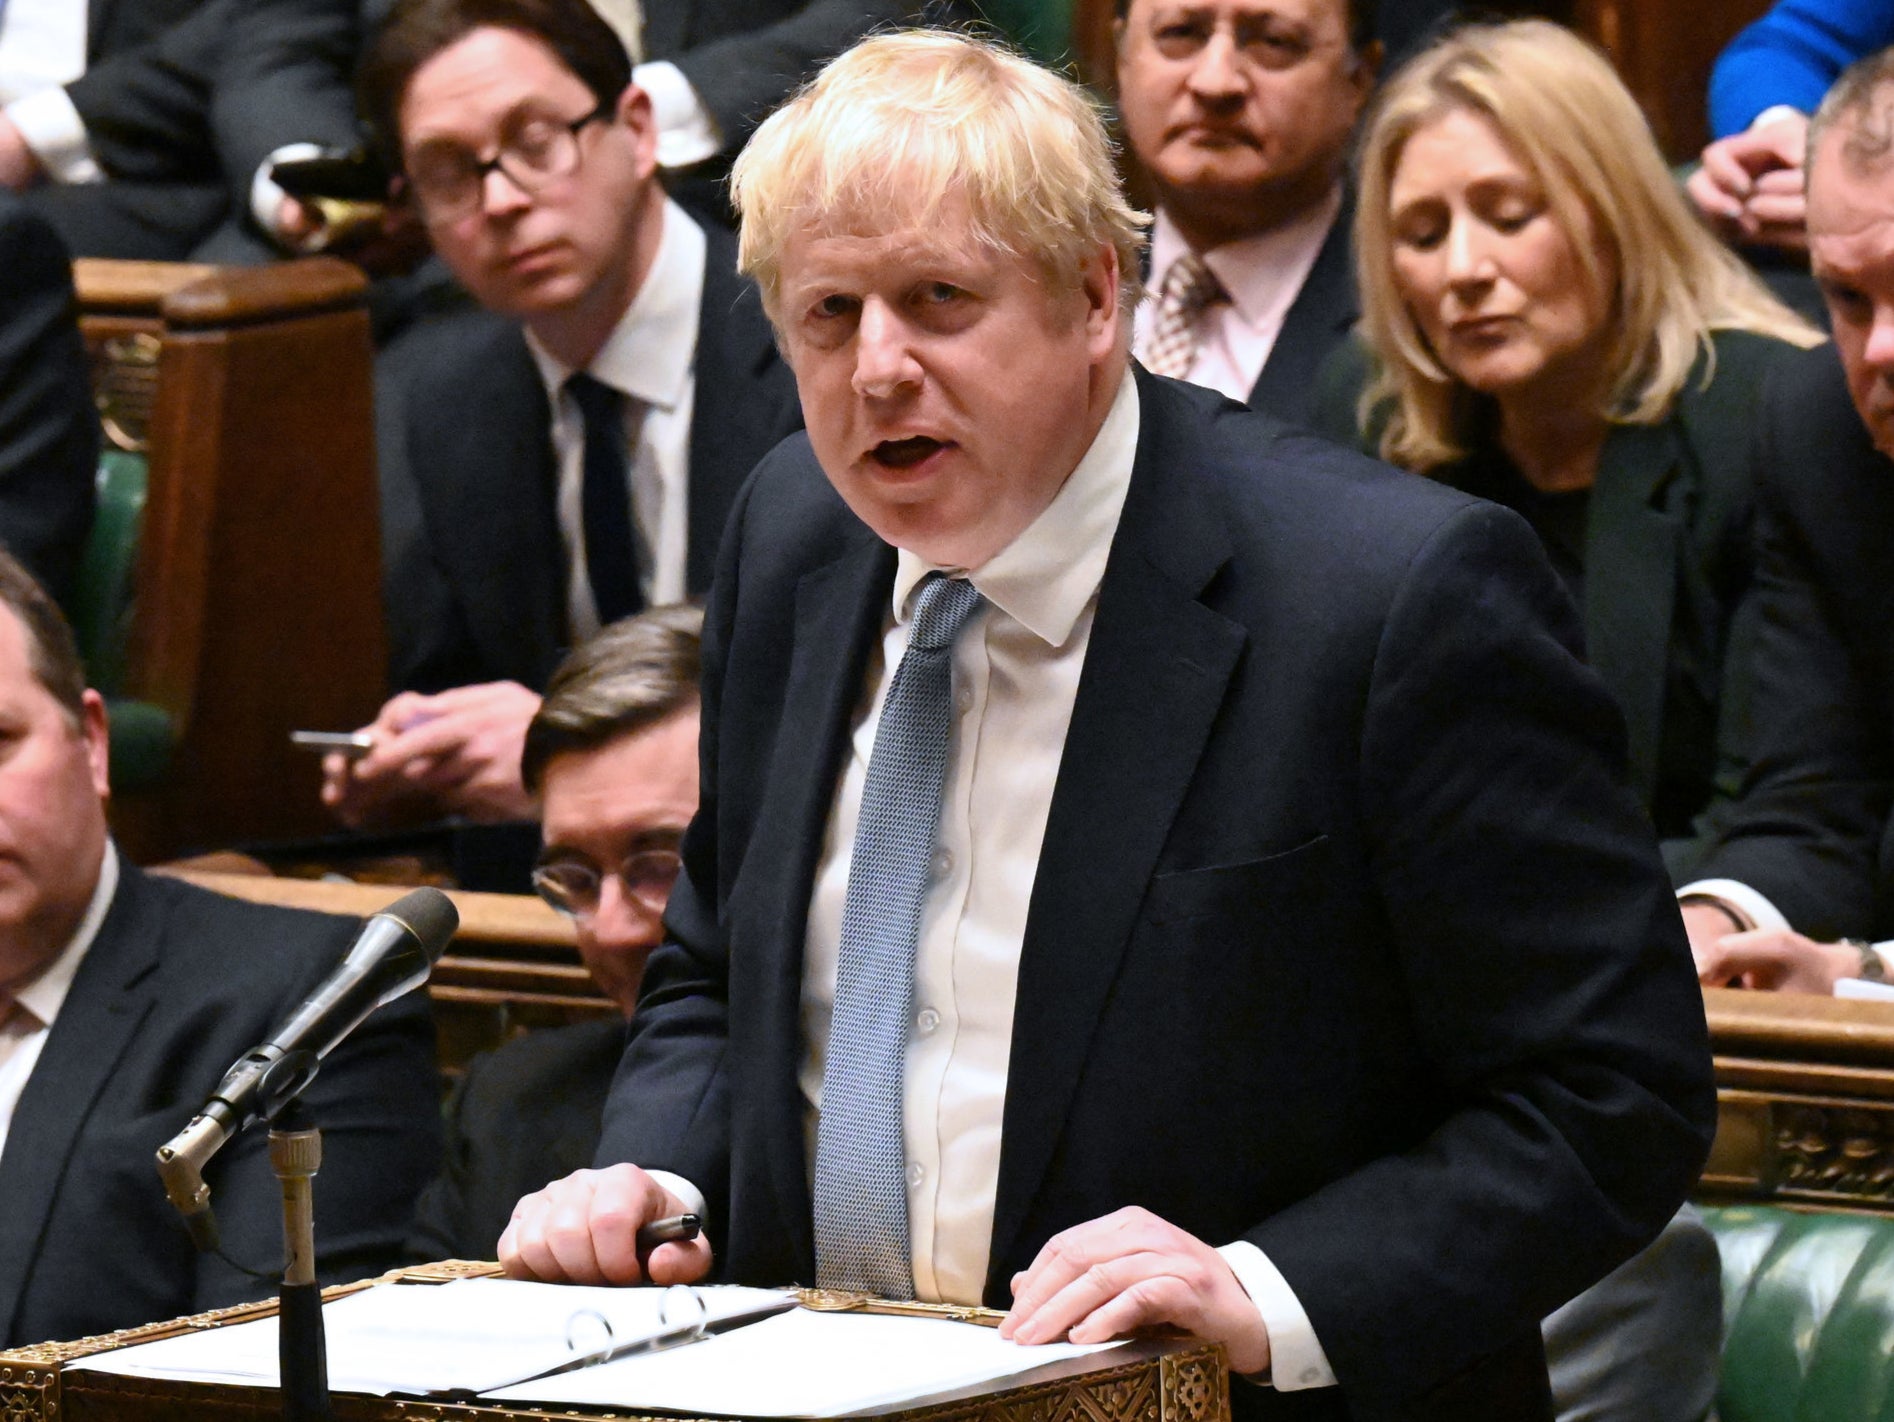 Boris Johnson apologises to the House of Commons over ‘Partygate’ on 31 January 2022